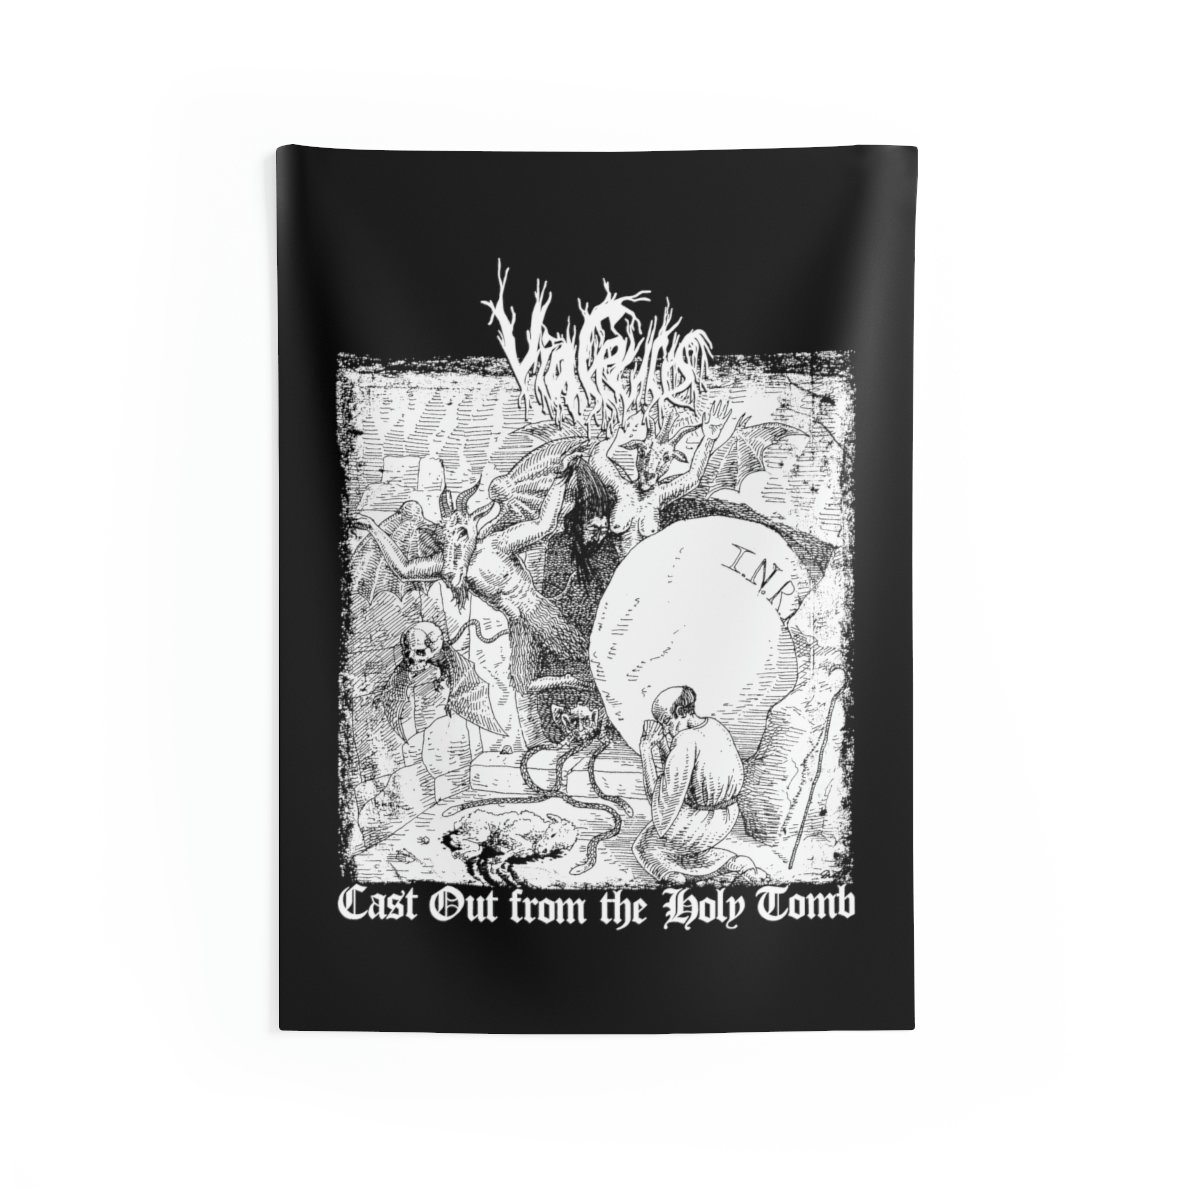 Via Crucis – Cast Out from the Holy Tomb Indoor Wall Tapestries